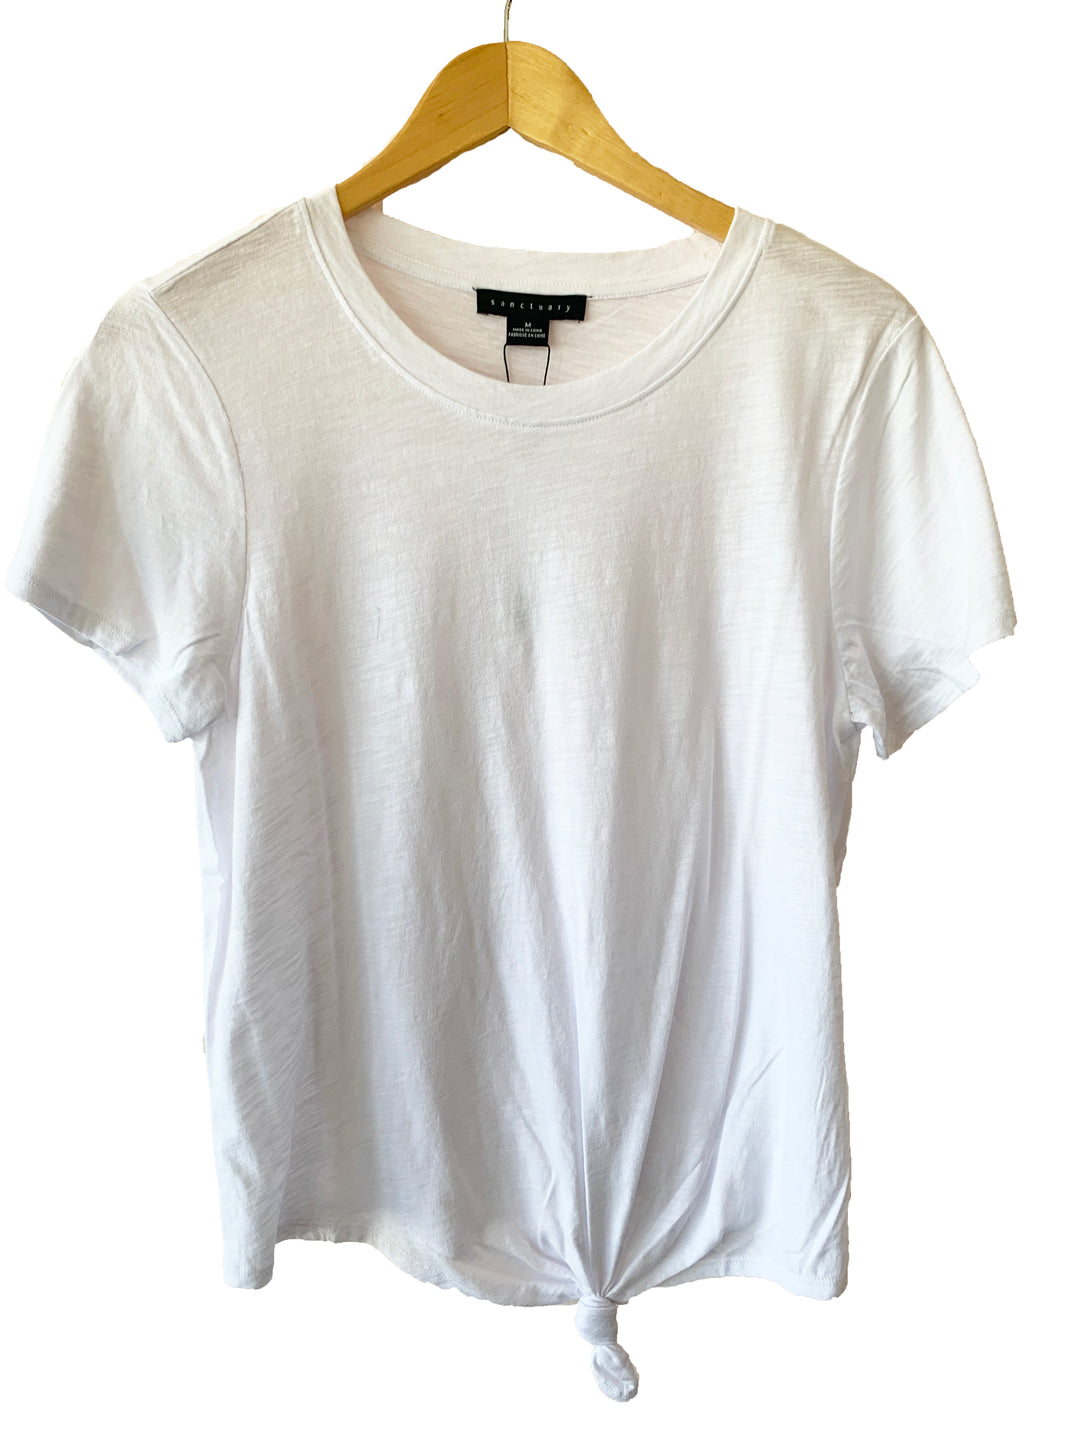 Perfect Knot Tee - White - Kingfisher Road - Online Boutique